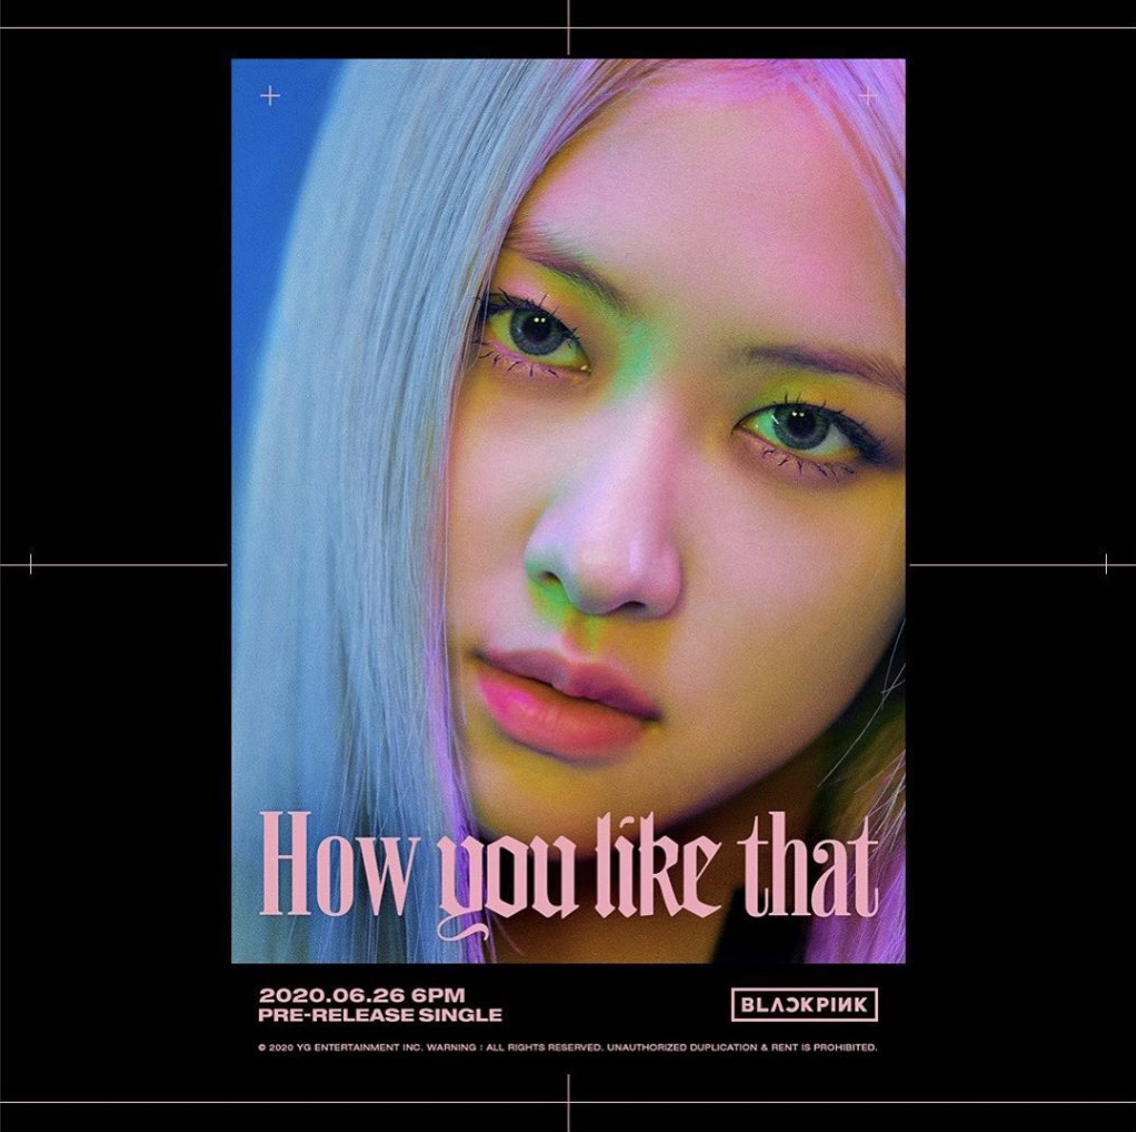 How You Like That: BLACKPINK's new single is out now - Hashtag Legend